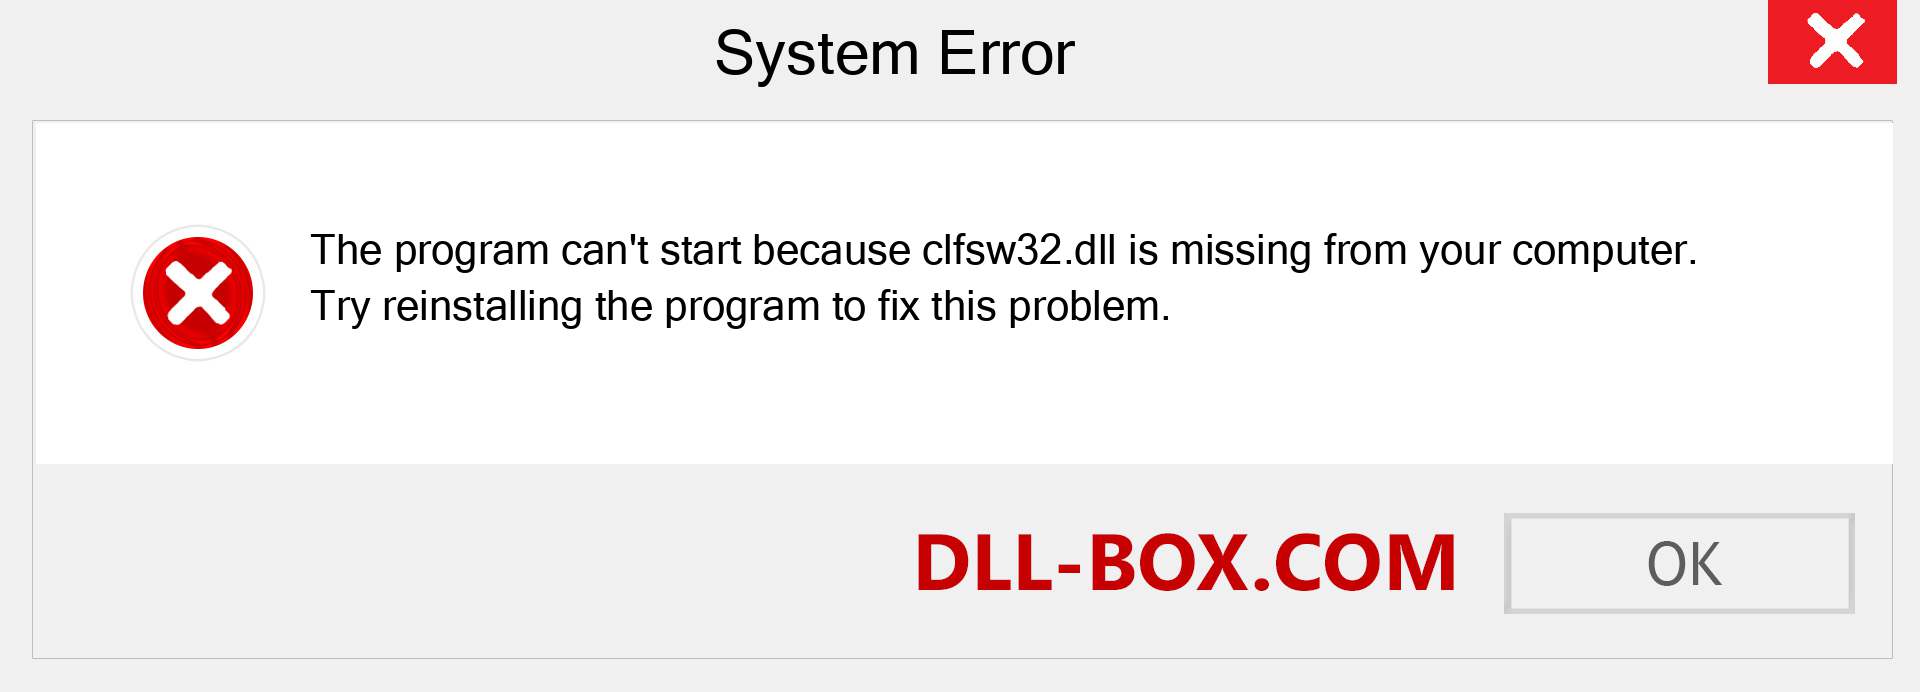  clfsw32.dll file is missing?. Download for Windows 7, 8, 10 - Fix  clfsw32 dll Missing Error on Windows, photos, images